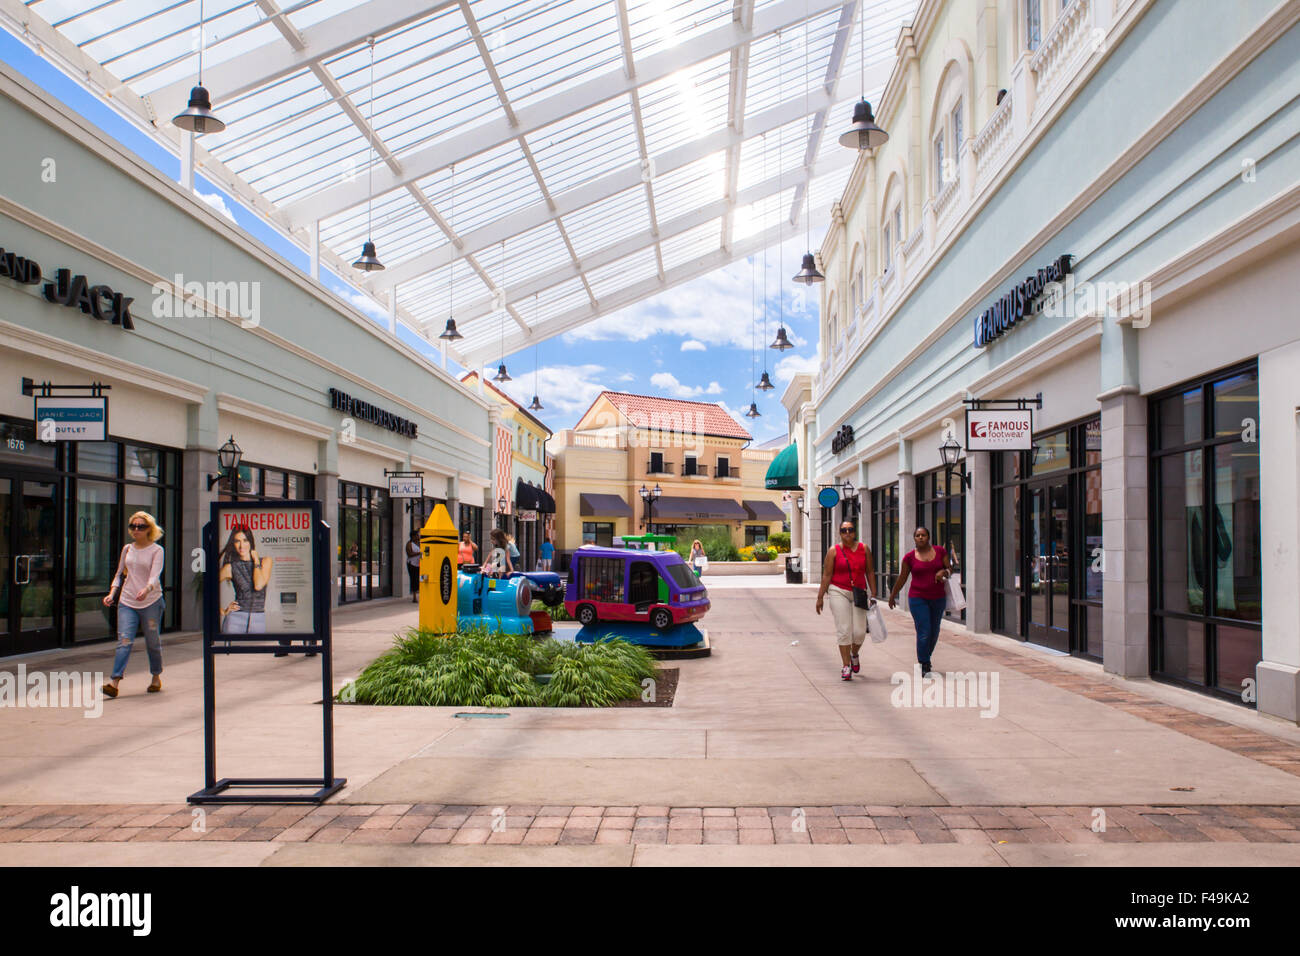 DEER PARK, NY - JULY 22, 2015: View of Tanger Factory Outlet outdoor shopping mall on Long Island, NY Stock Photo